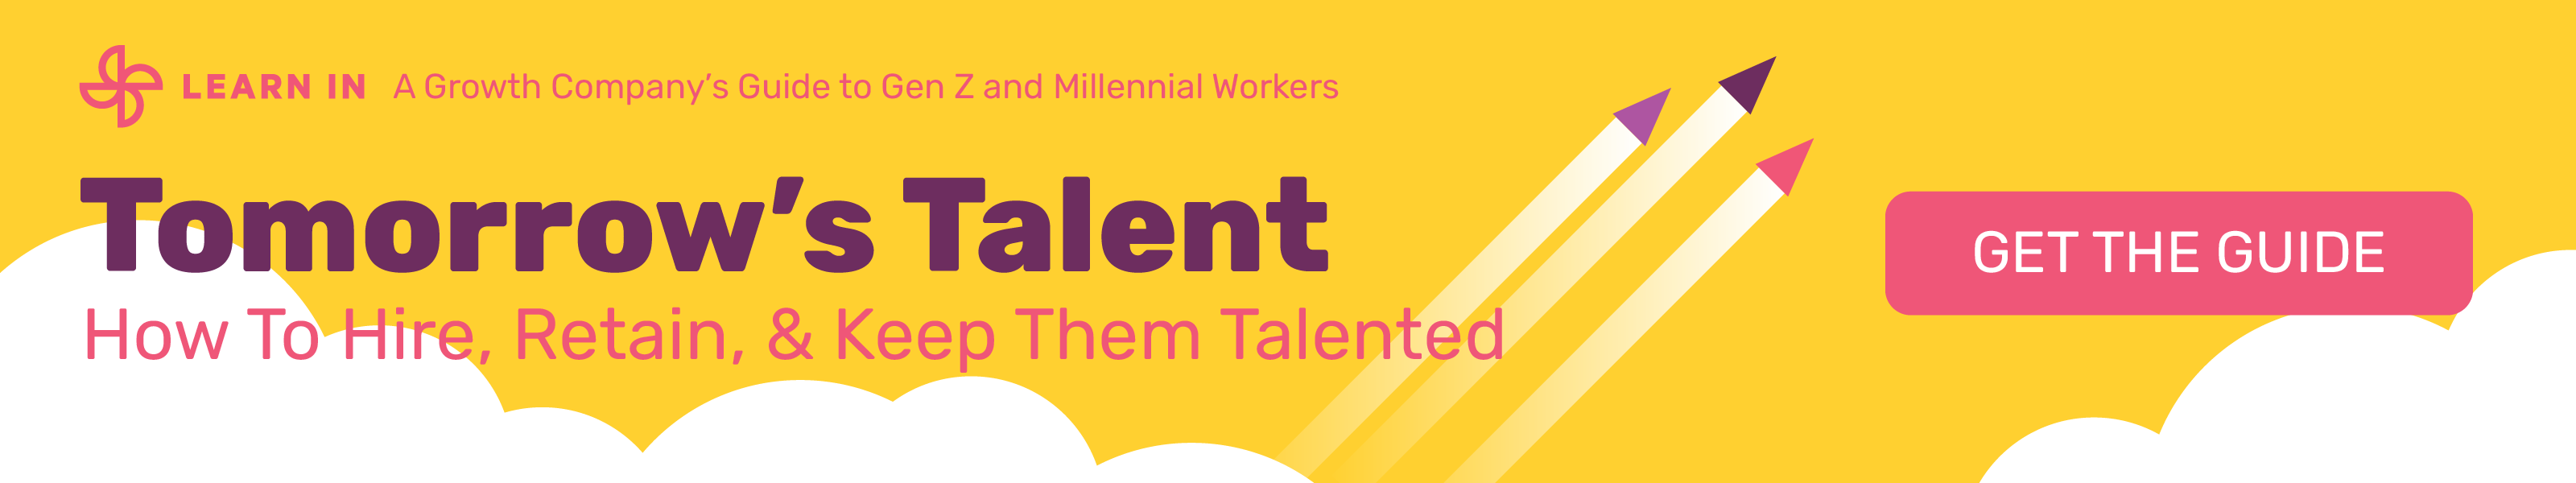 Tomorrow's Talent ebook Banner: How to Hire, Retain, and Keep Them Talented